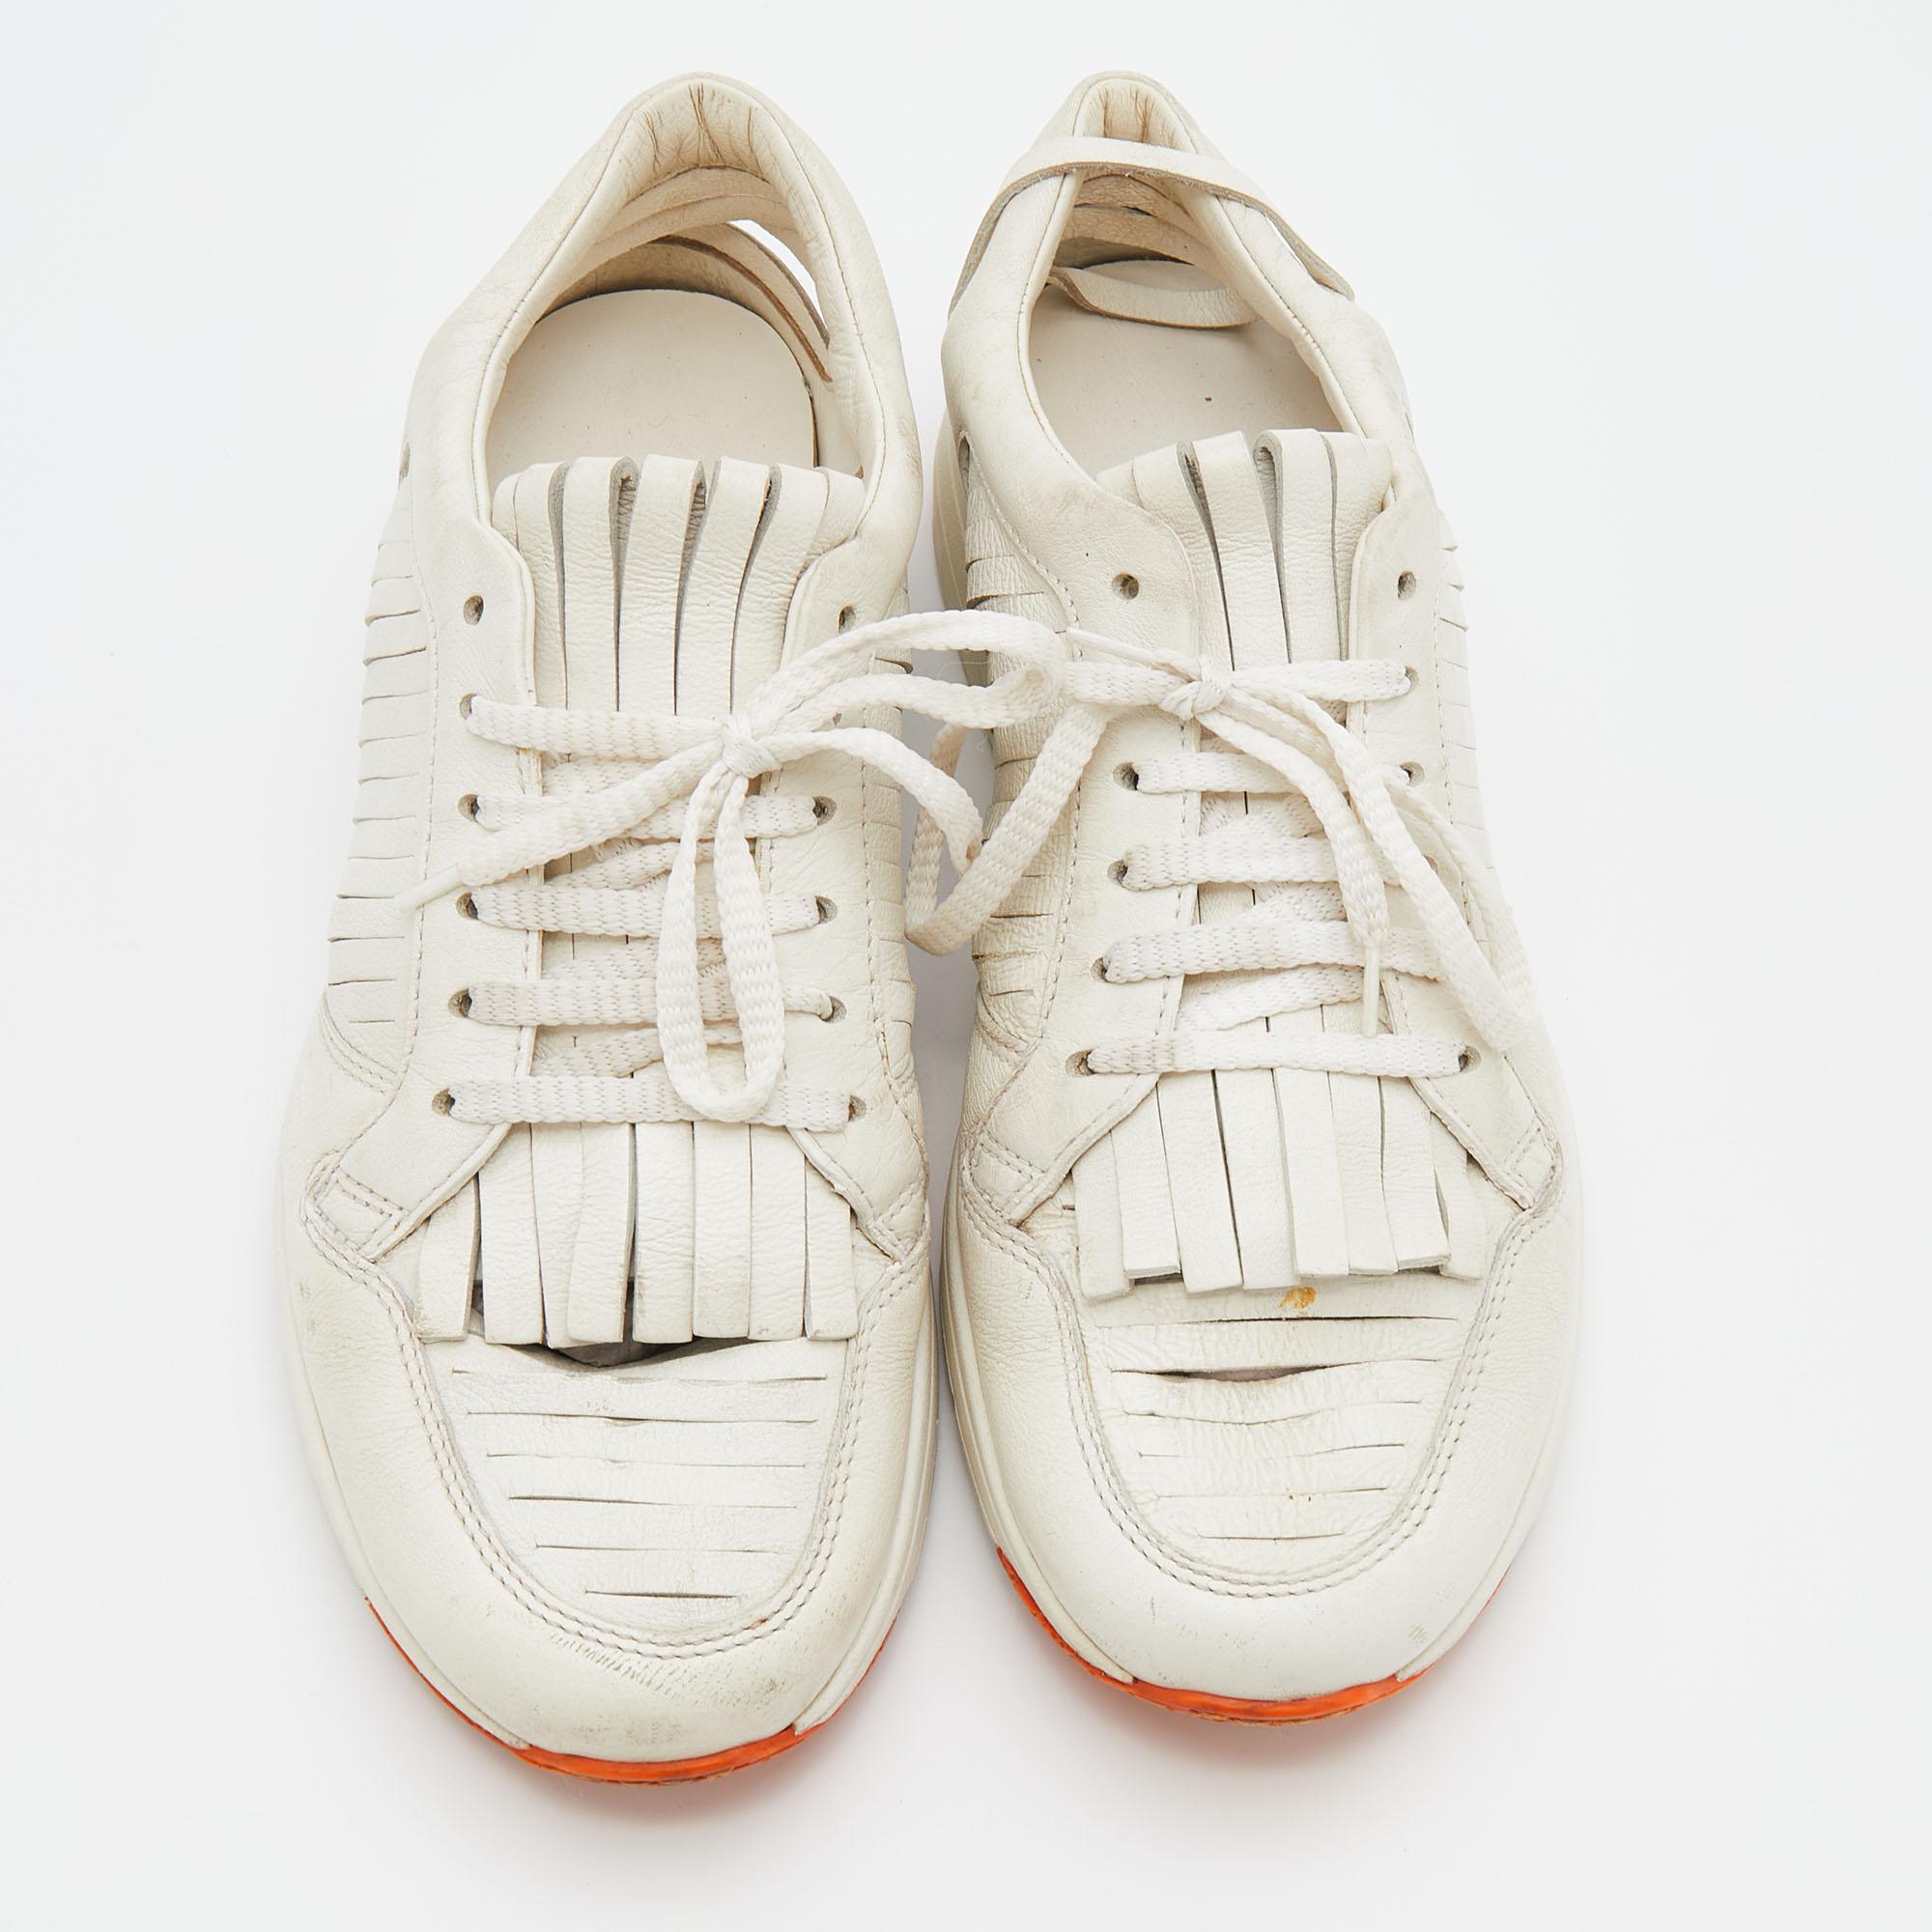 These chic white sneakers by Gucci are just what you need to grace your look. Crafted with leather, this pair comes with lace-ups accompanied by tassel detailing. It has snug insoles and is complete with durable rubber soles for ultimate comfort.

